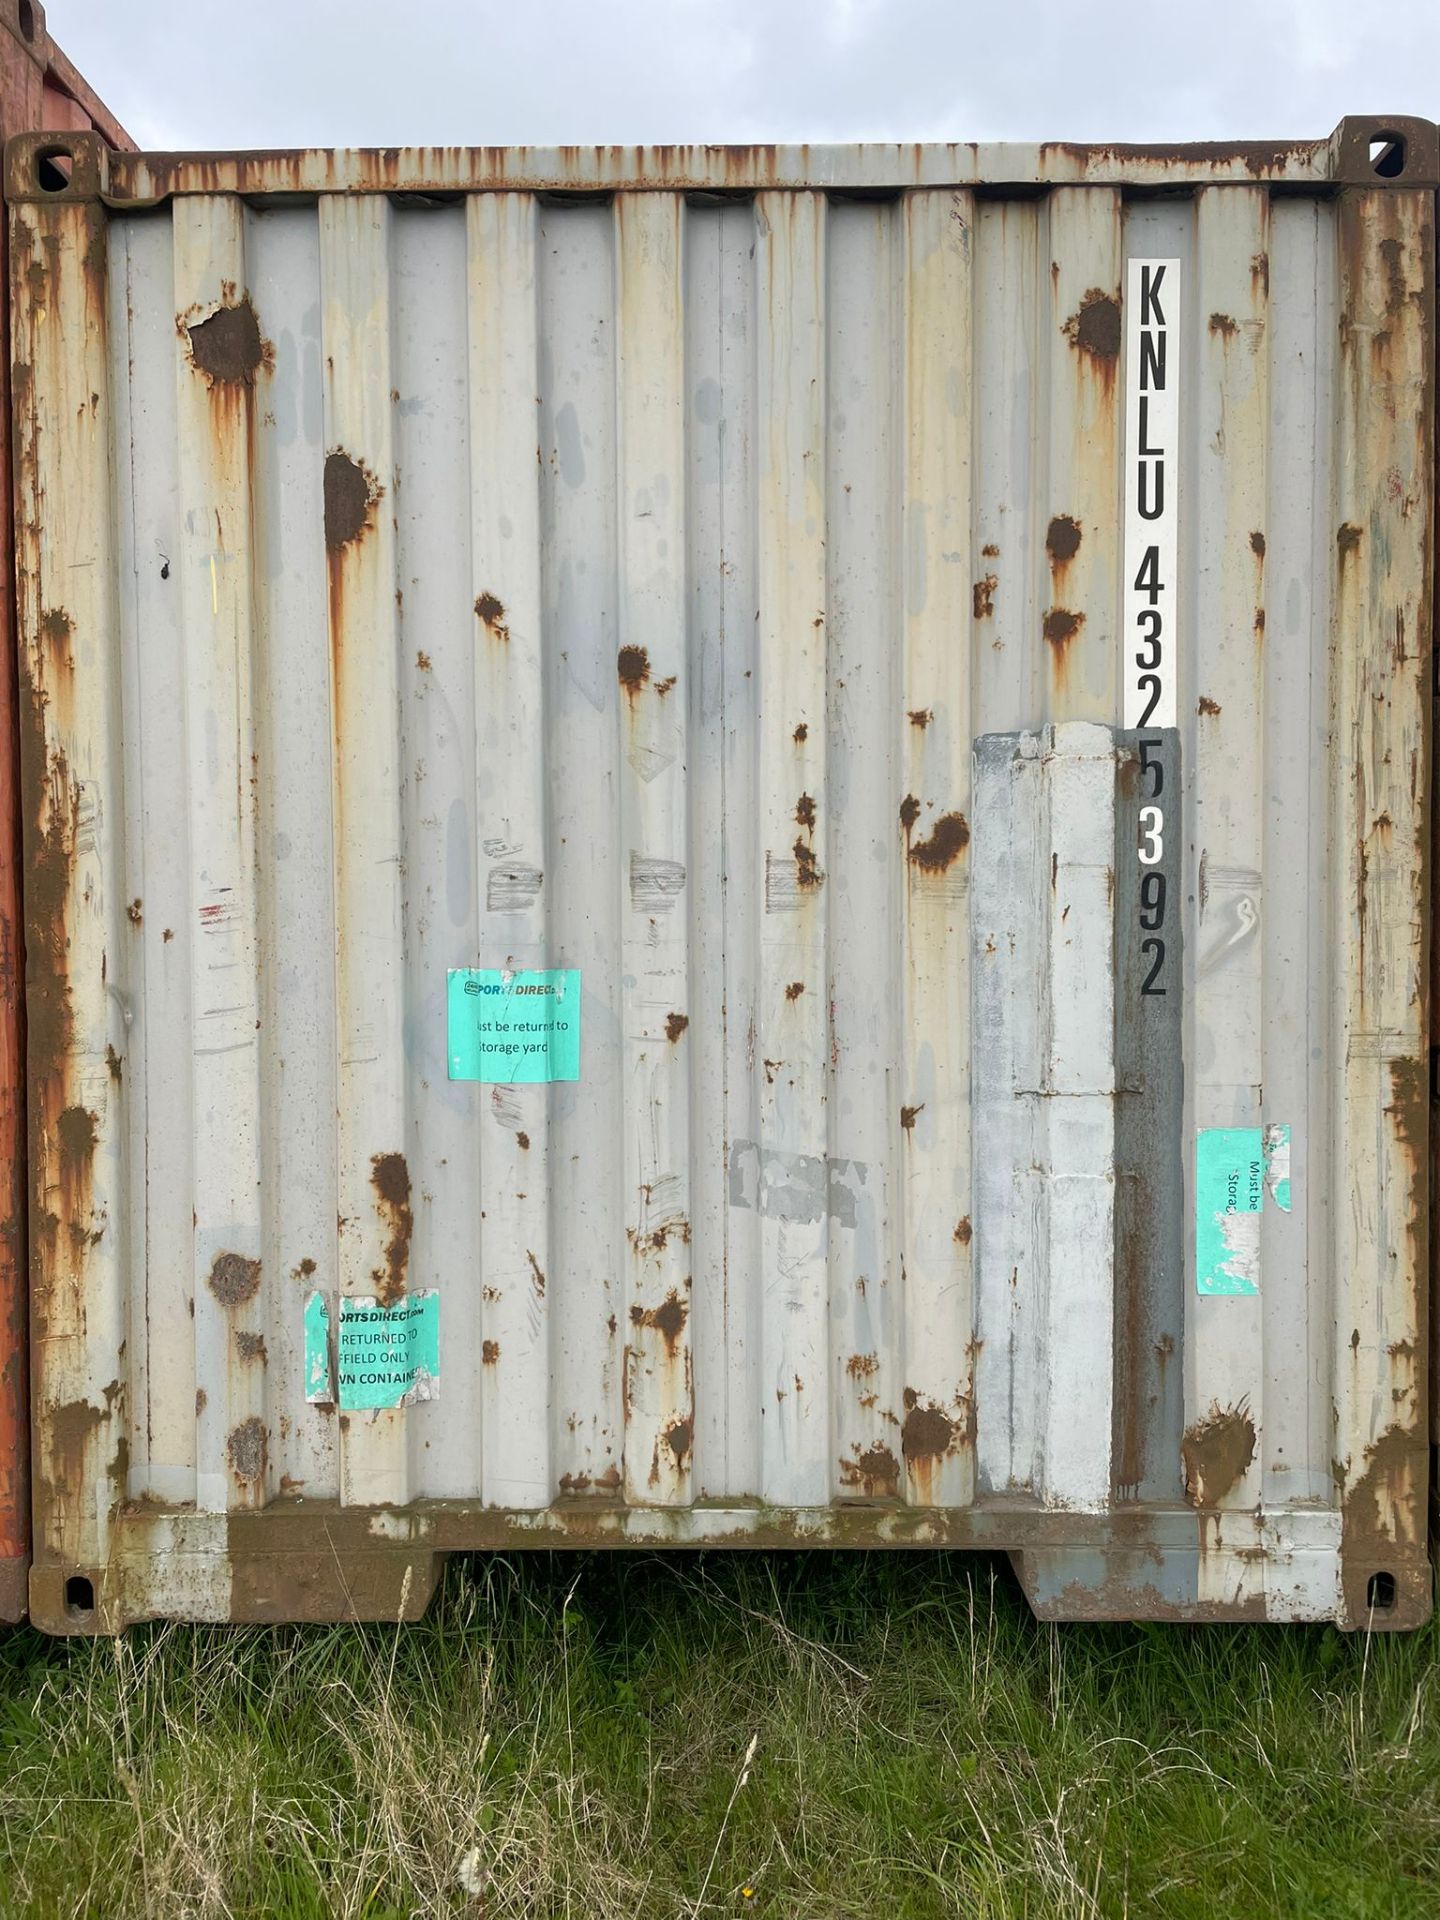 Shipping Container - ref KNLU4325392 - NO RESERVE (40’ GP - Standard) - Image 5 of 5